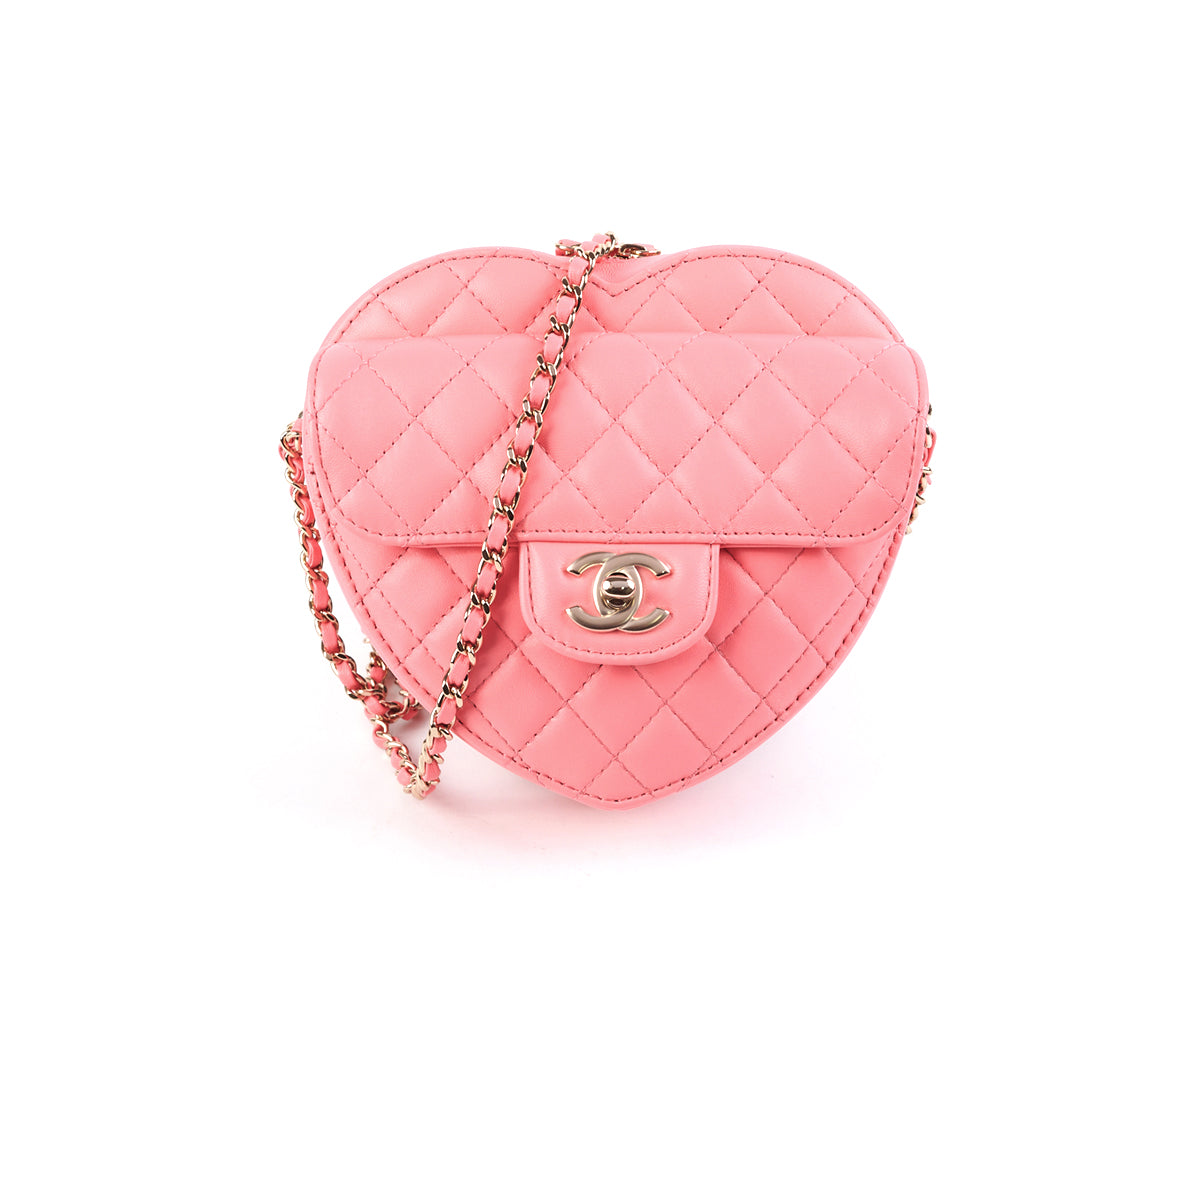 Chanel Heart Bag in Coral Pink Lambskin with Gold-Tone Metal — UFO